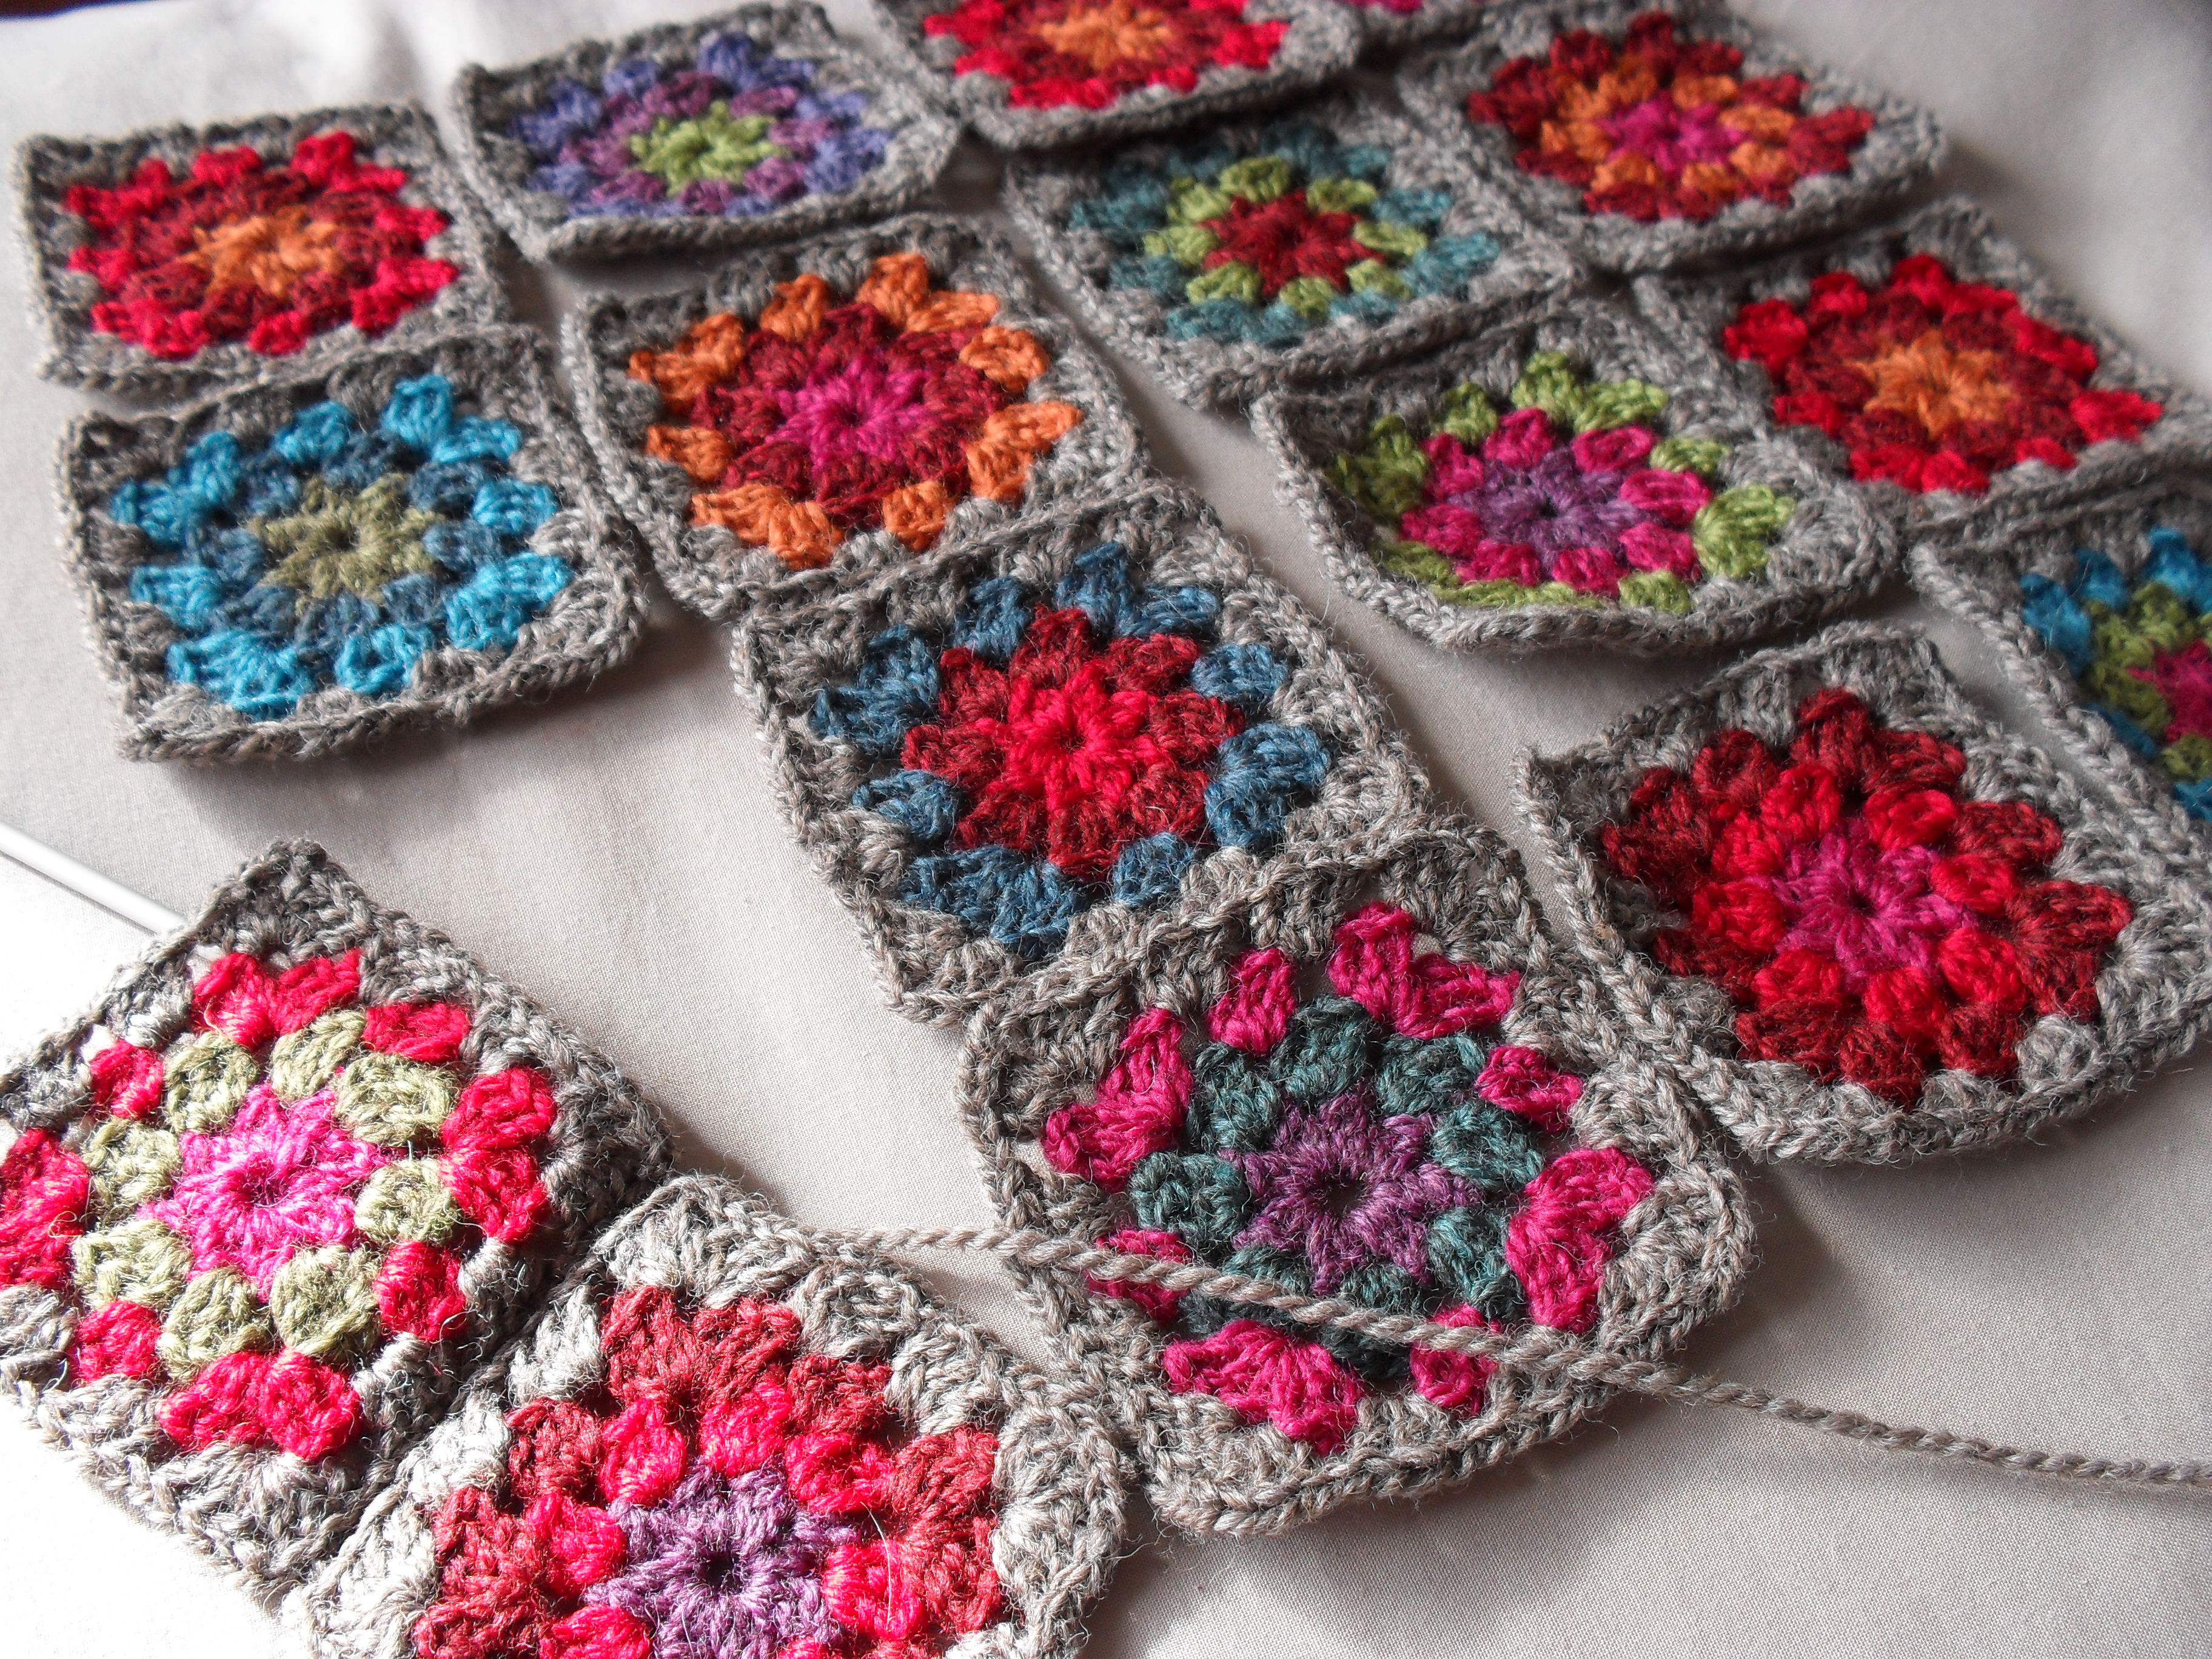 Crochet blanket; joining the granny squares together Flickr.